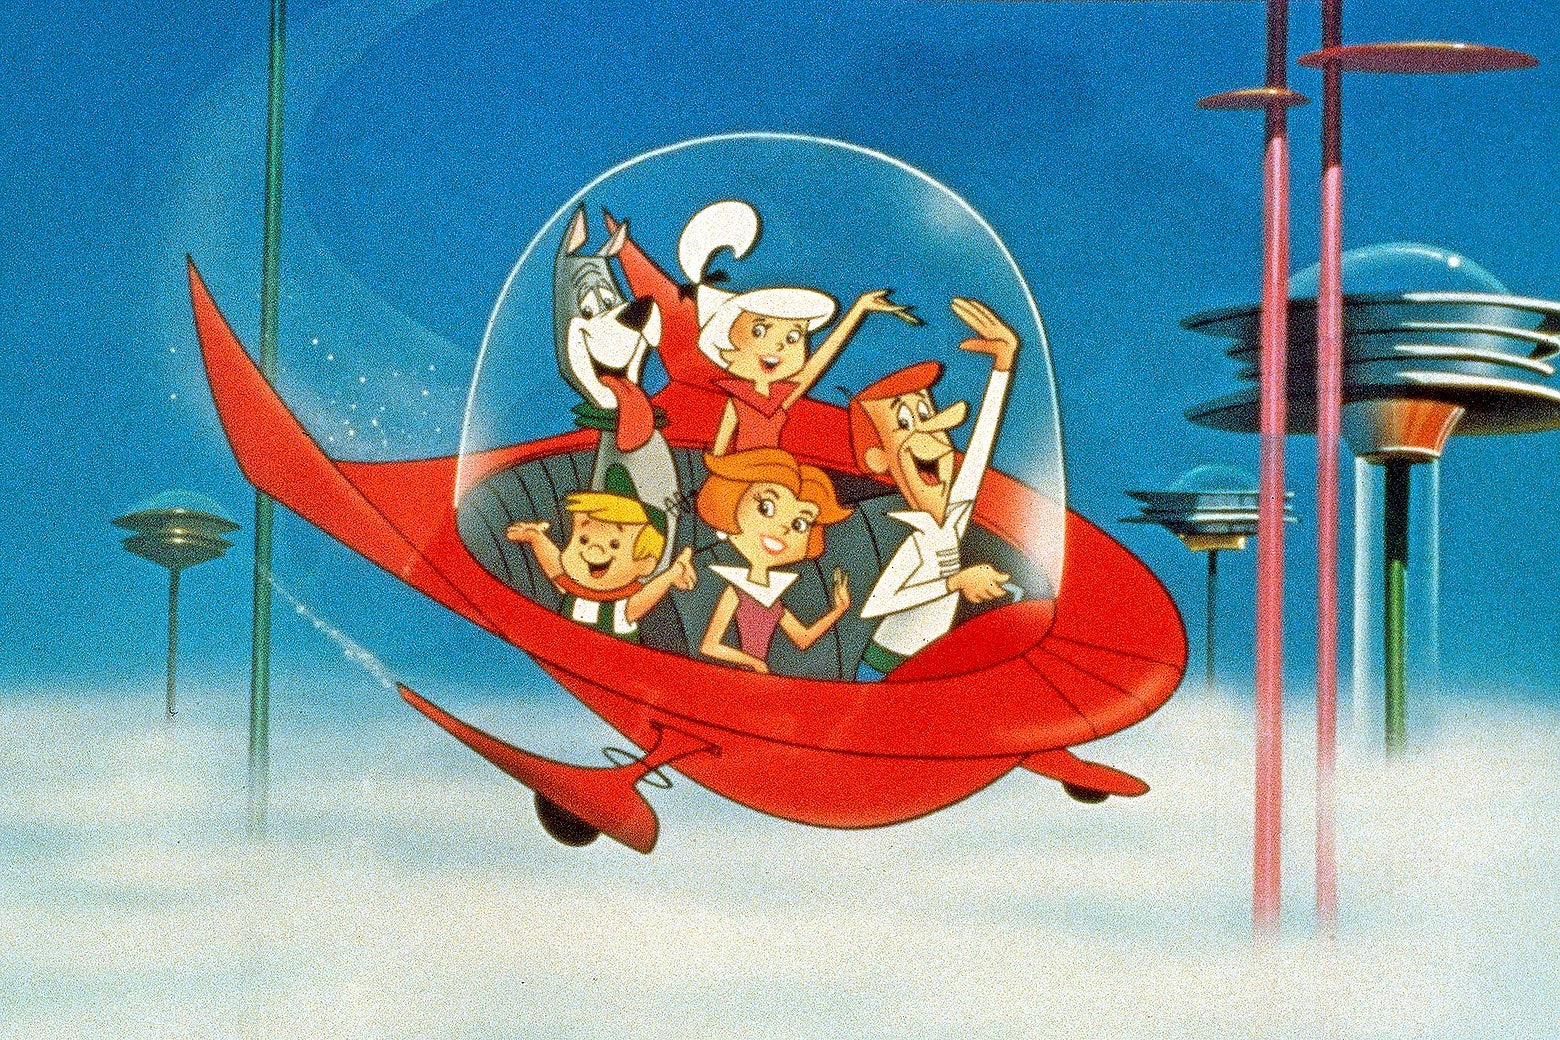 The Jetsons, now 60 years old, is iconic. That's a problem.